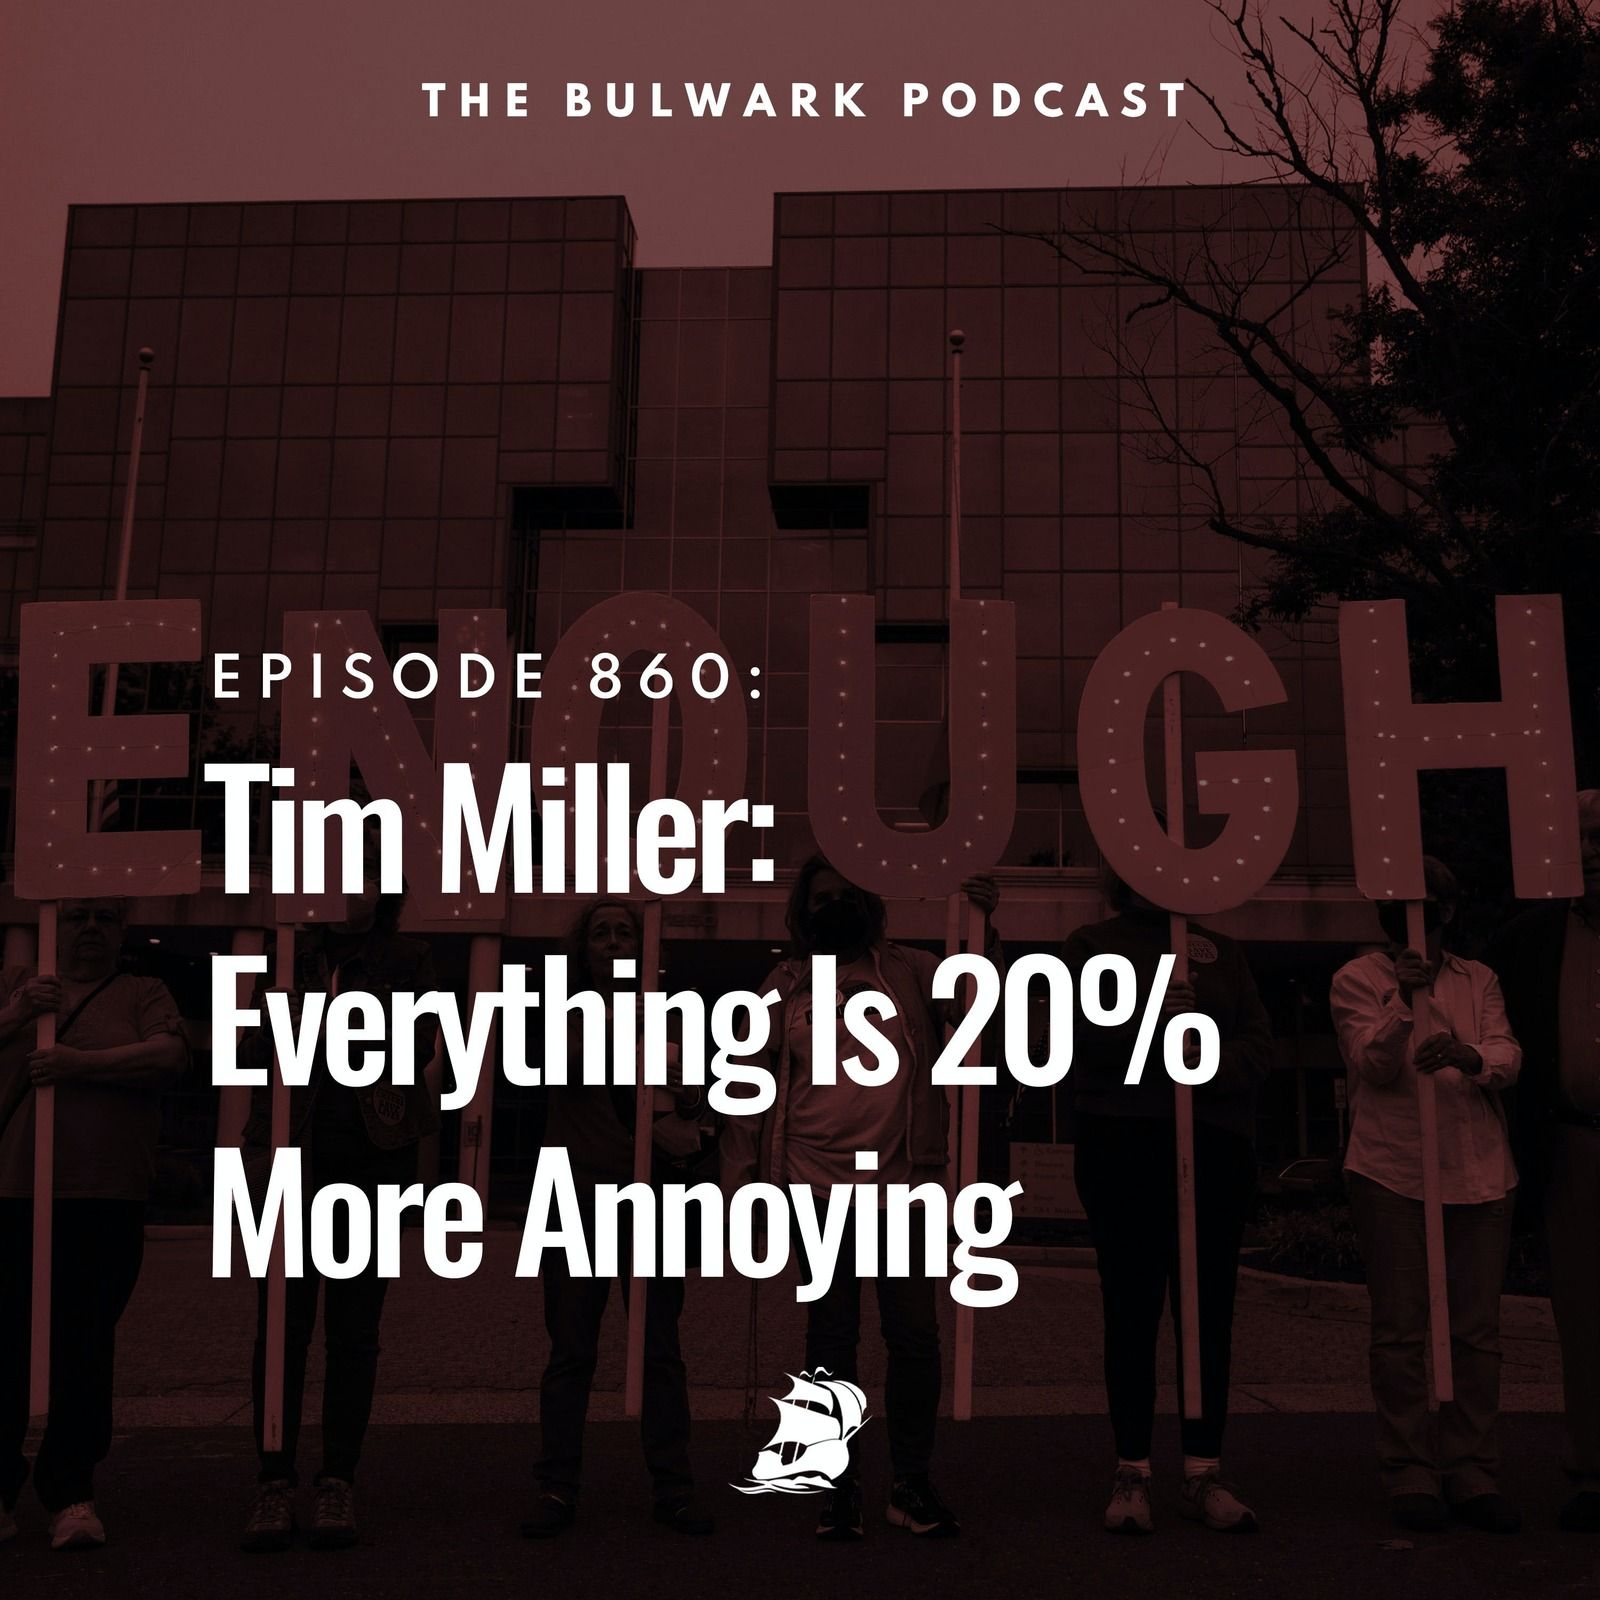 Tim Miller: Everything Is 20% More Annoying